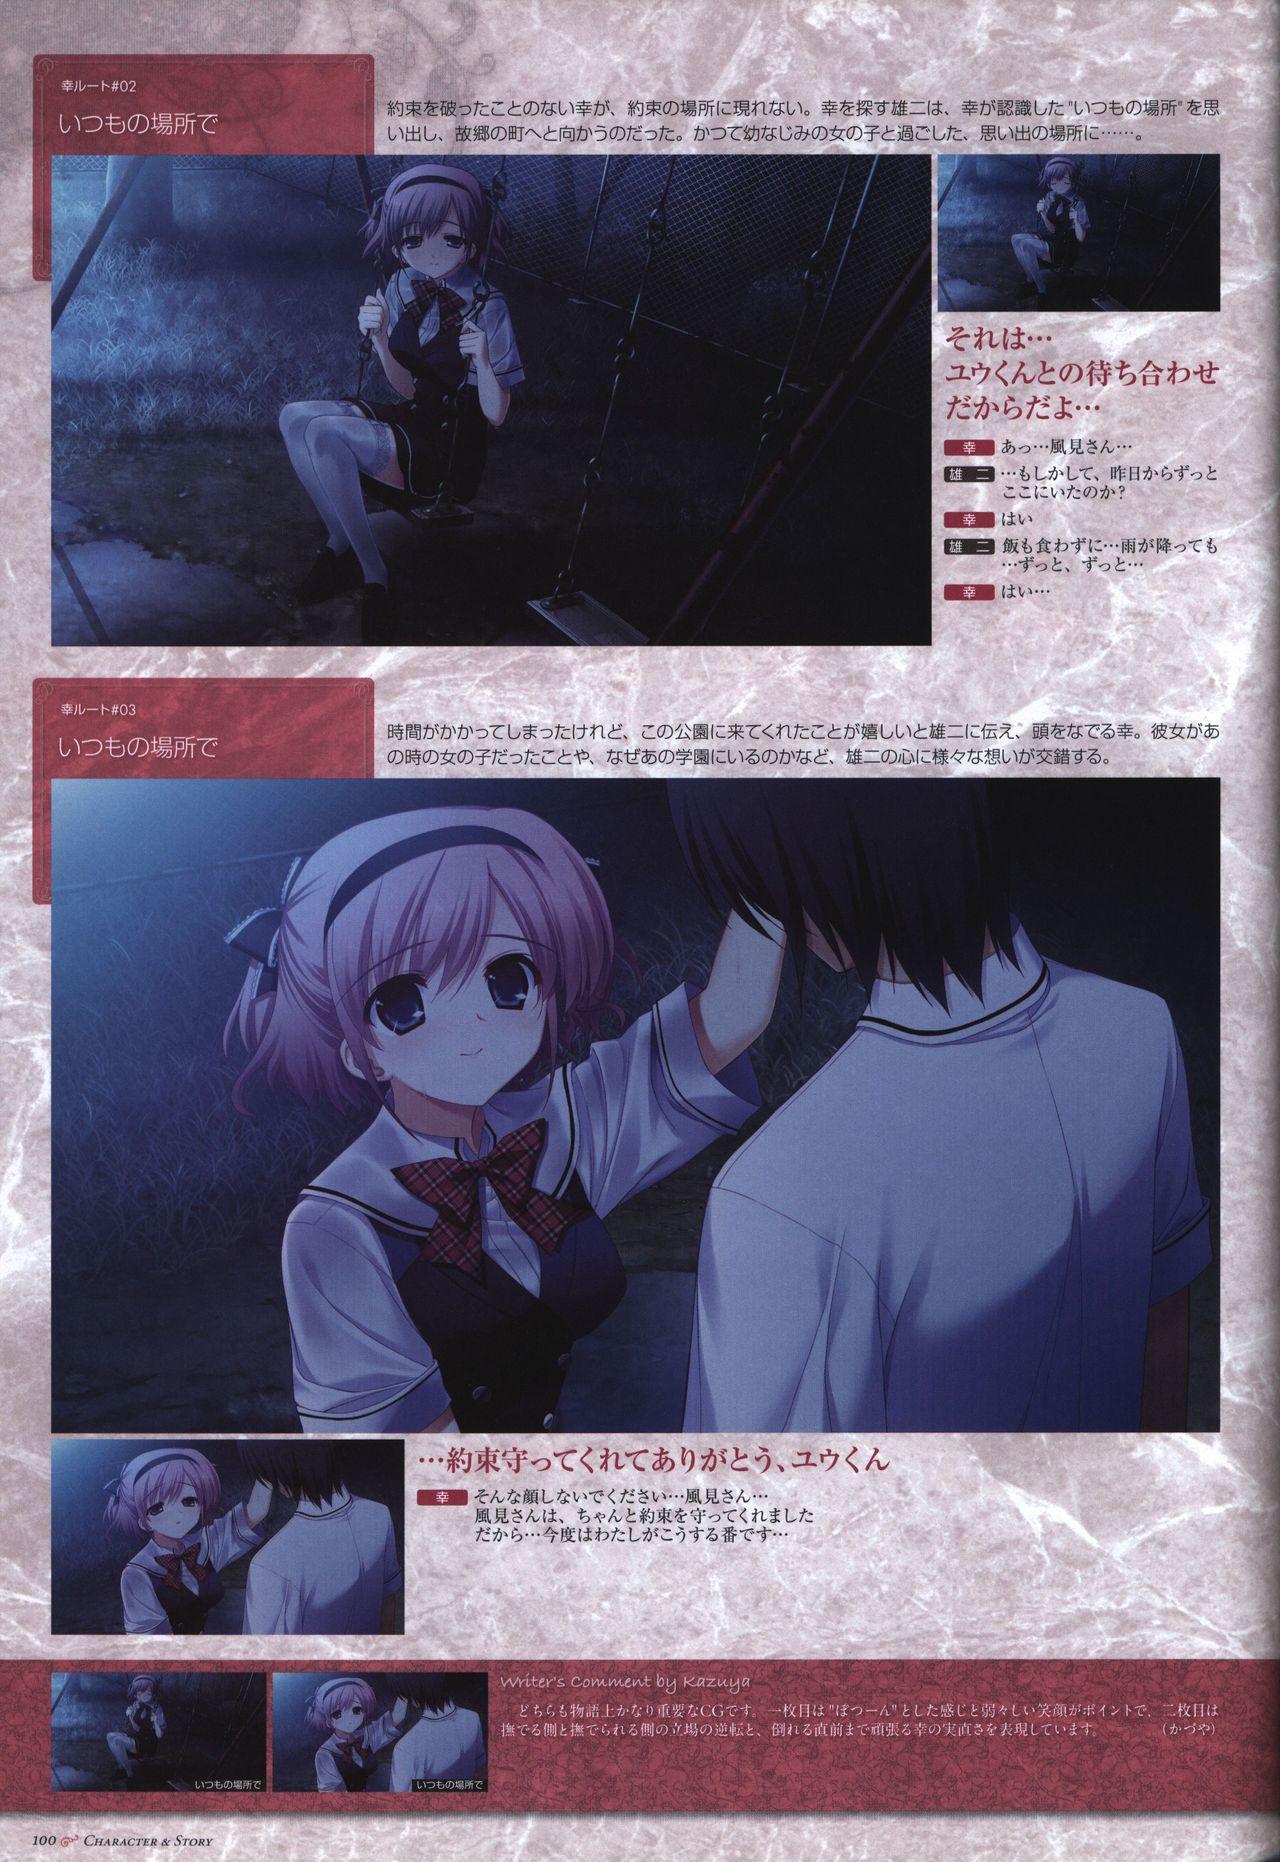 The Fruit of Grisaia Visual FanBook 100